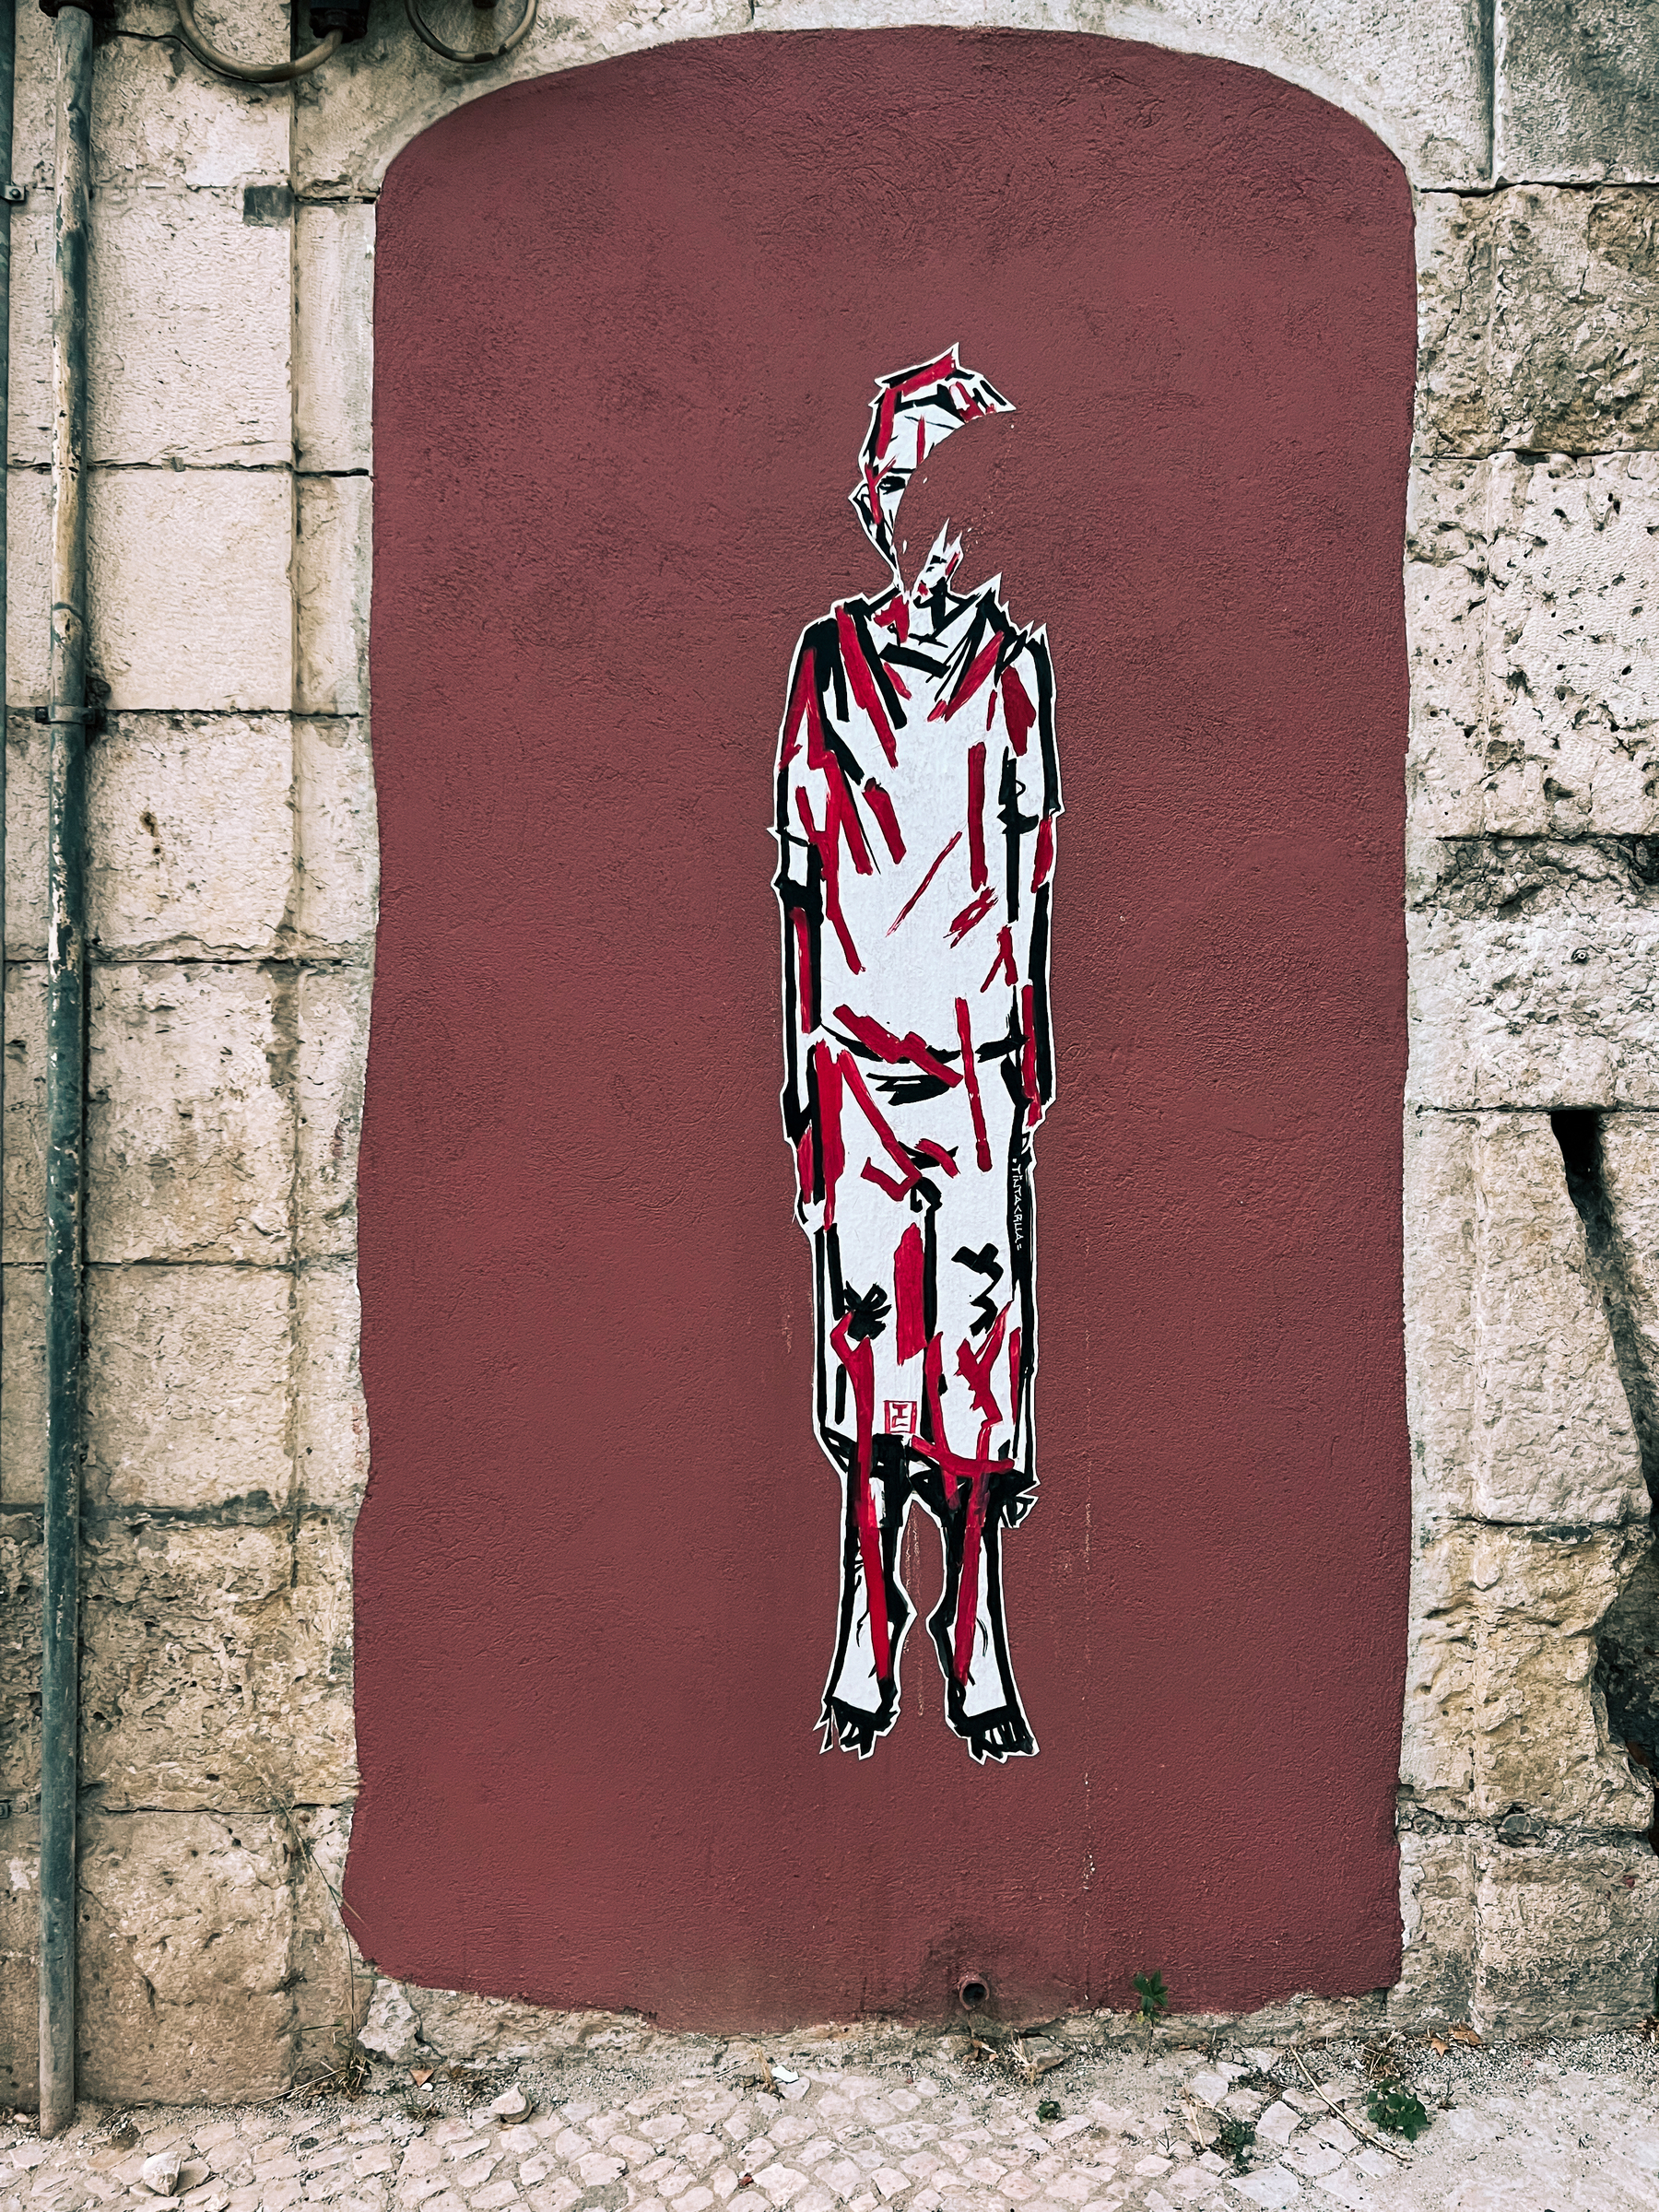 Street art piece, a figure of a man is plastered on a wall 